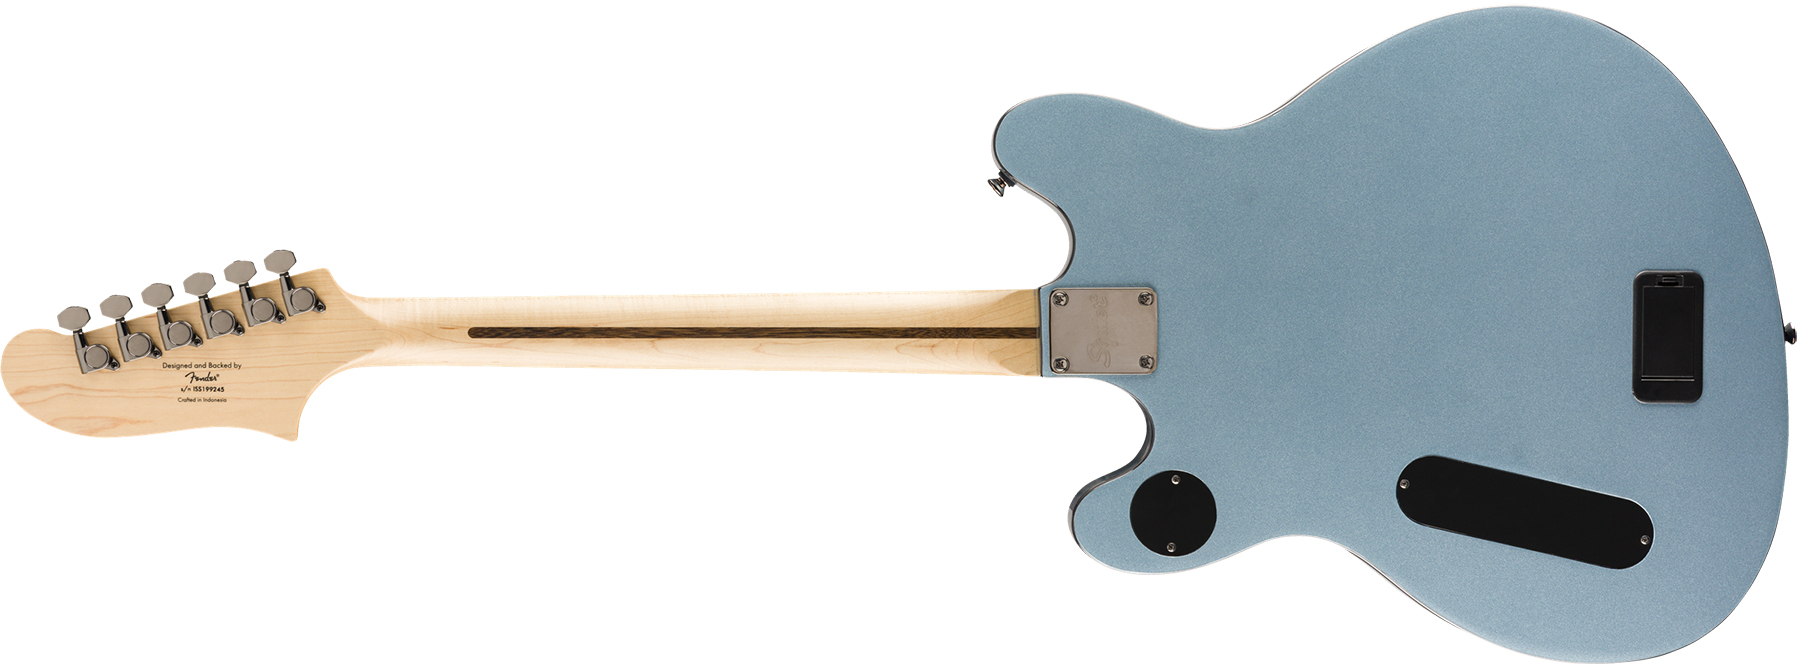 Squier Starcaster Contemporary Active Starcaster 2019 Hh Ht Mn - Ice Blue Metallic - Retro rock electric guitar - Variation 1